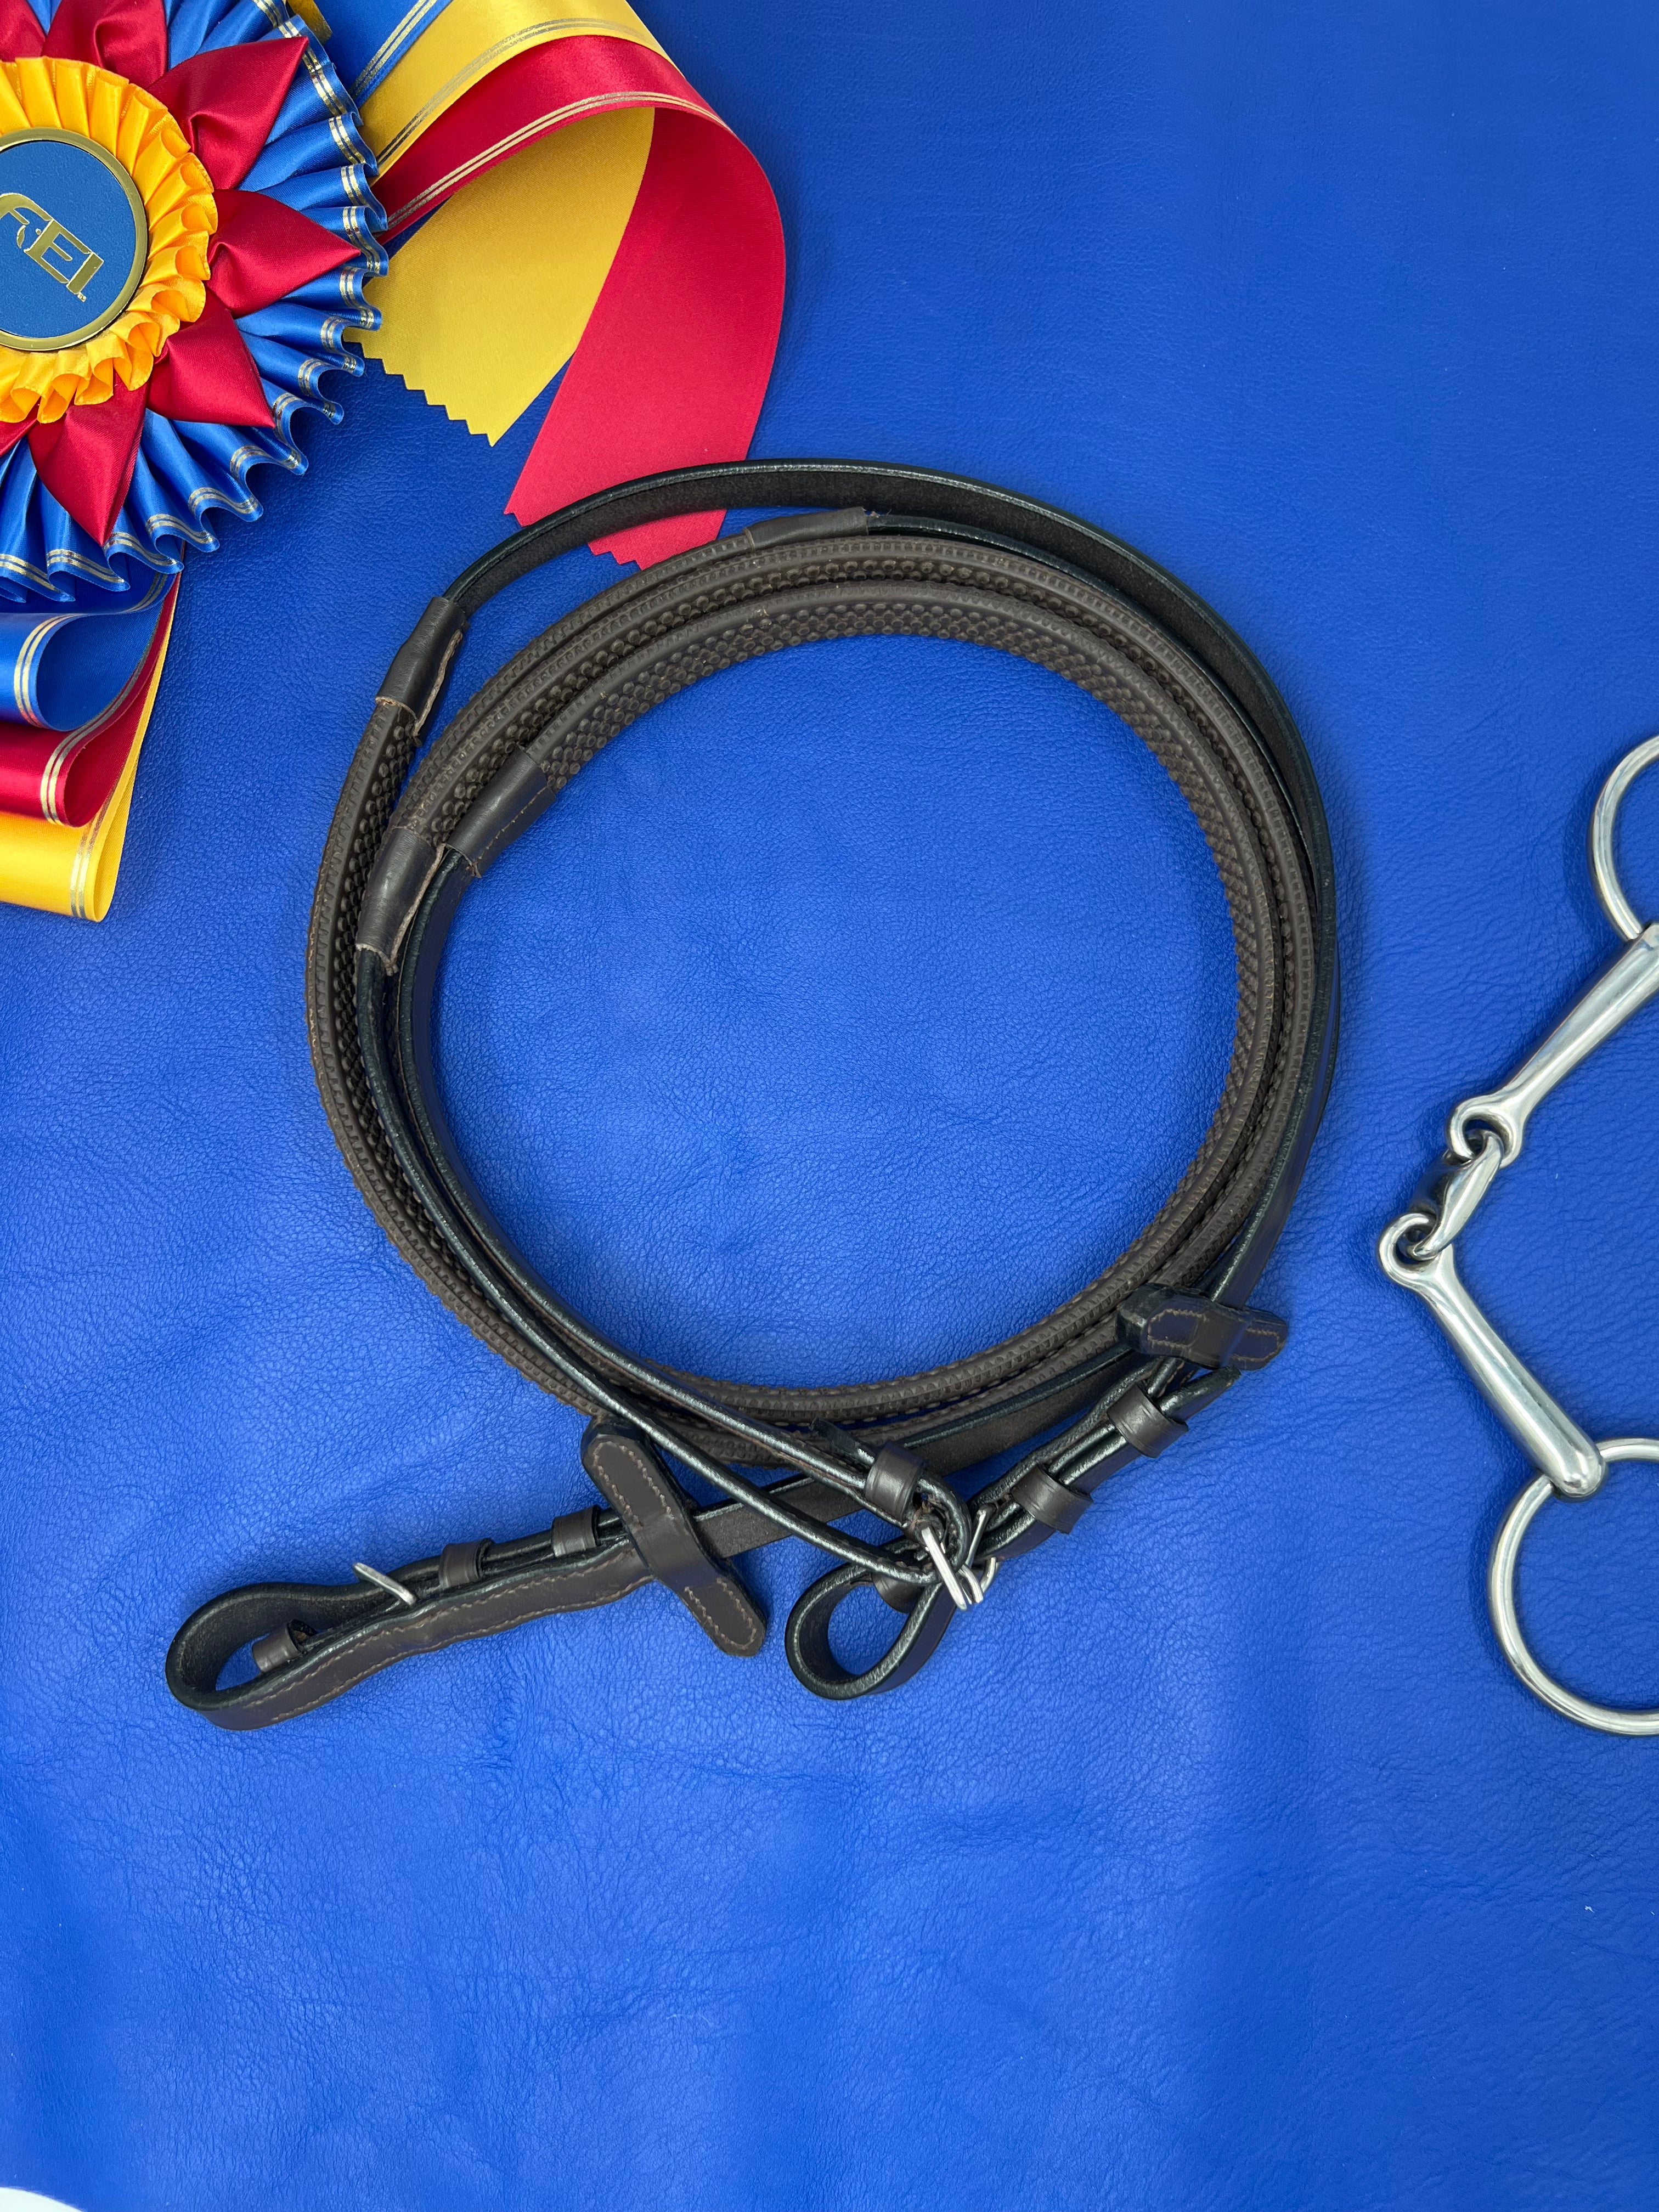 Rubber Coated Reins